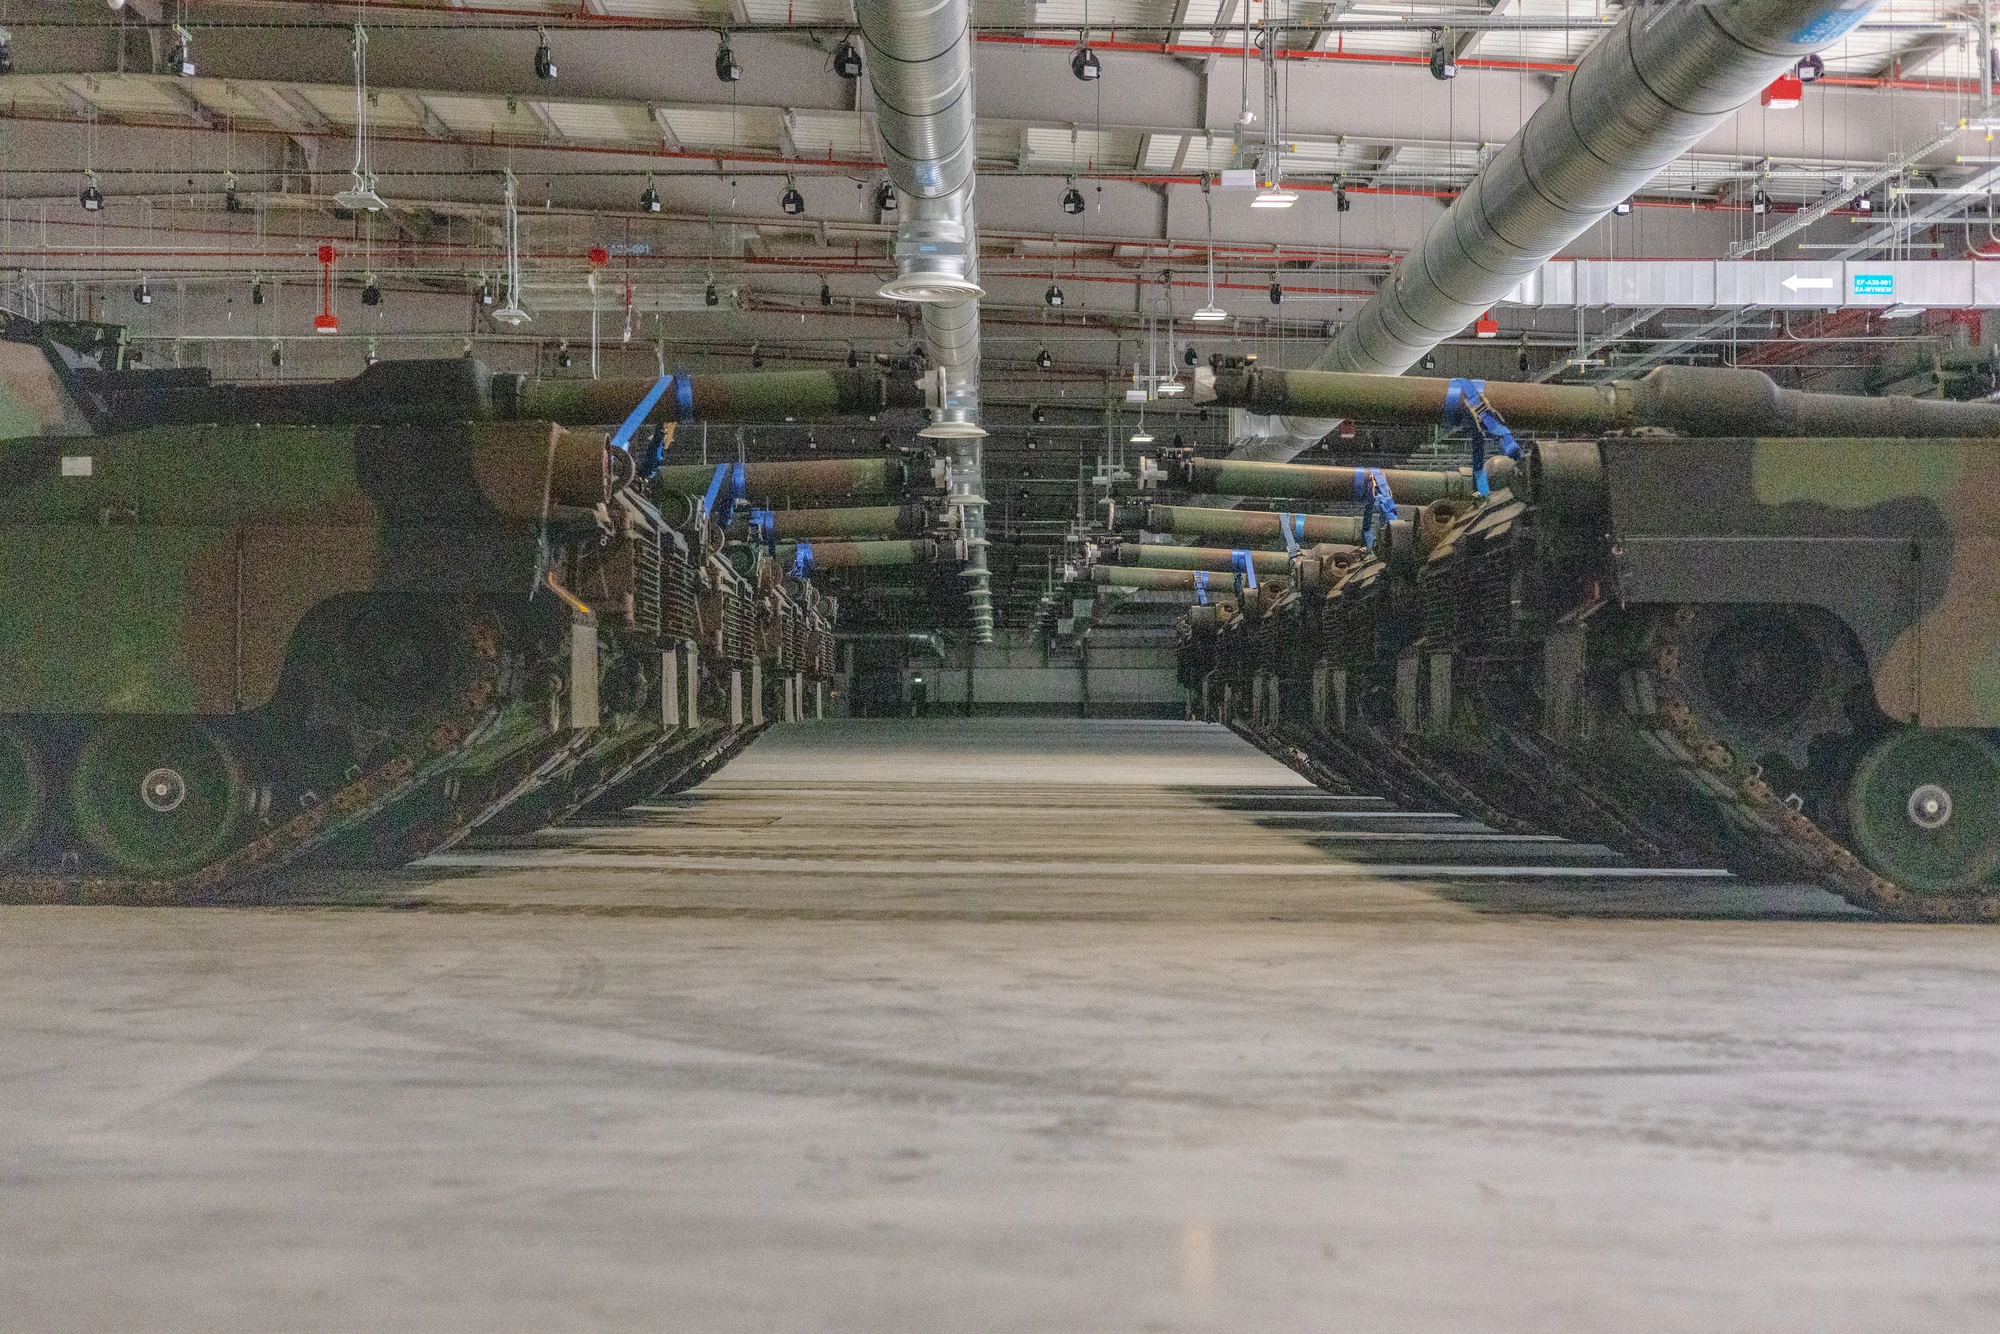 M1 Abrams tanks are positioned in the storage facility to maximize space at the Powidz APS-2 Worksite, Powidz, Poland, on June 28, 2024. The Powidz APS-2 Worksite enhances the Army’s ability to rapidly and dynamically employ forces within theater, improving deterrence capabilities and readiness.(U.S. Army photo by Capt. Michael Mastrangelo)